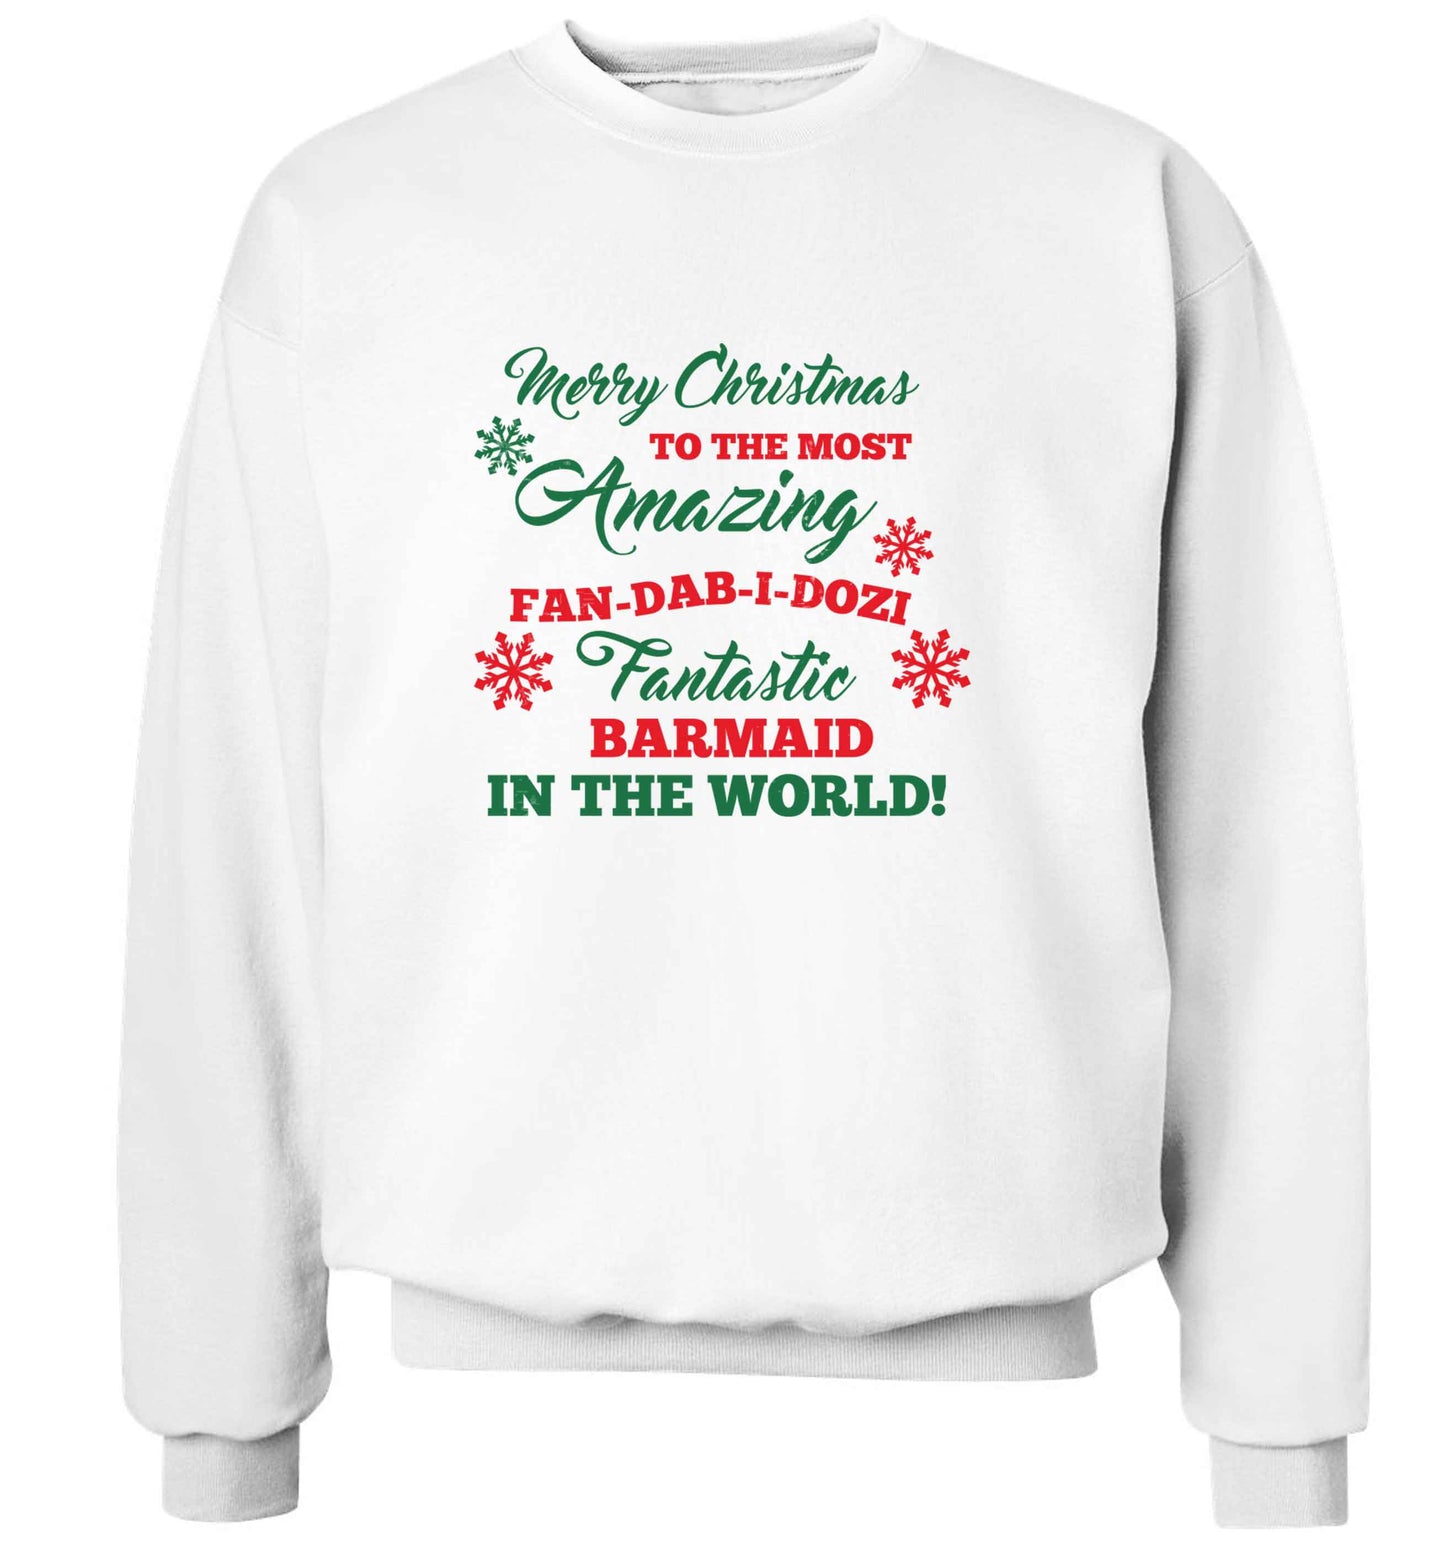 Merry Christmas to the most amazing barmaid in the world! adult's unisex white sweater 2XL